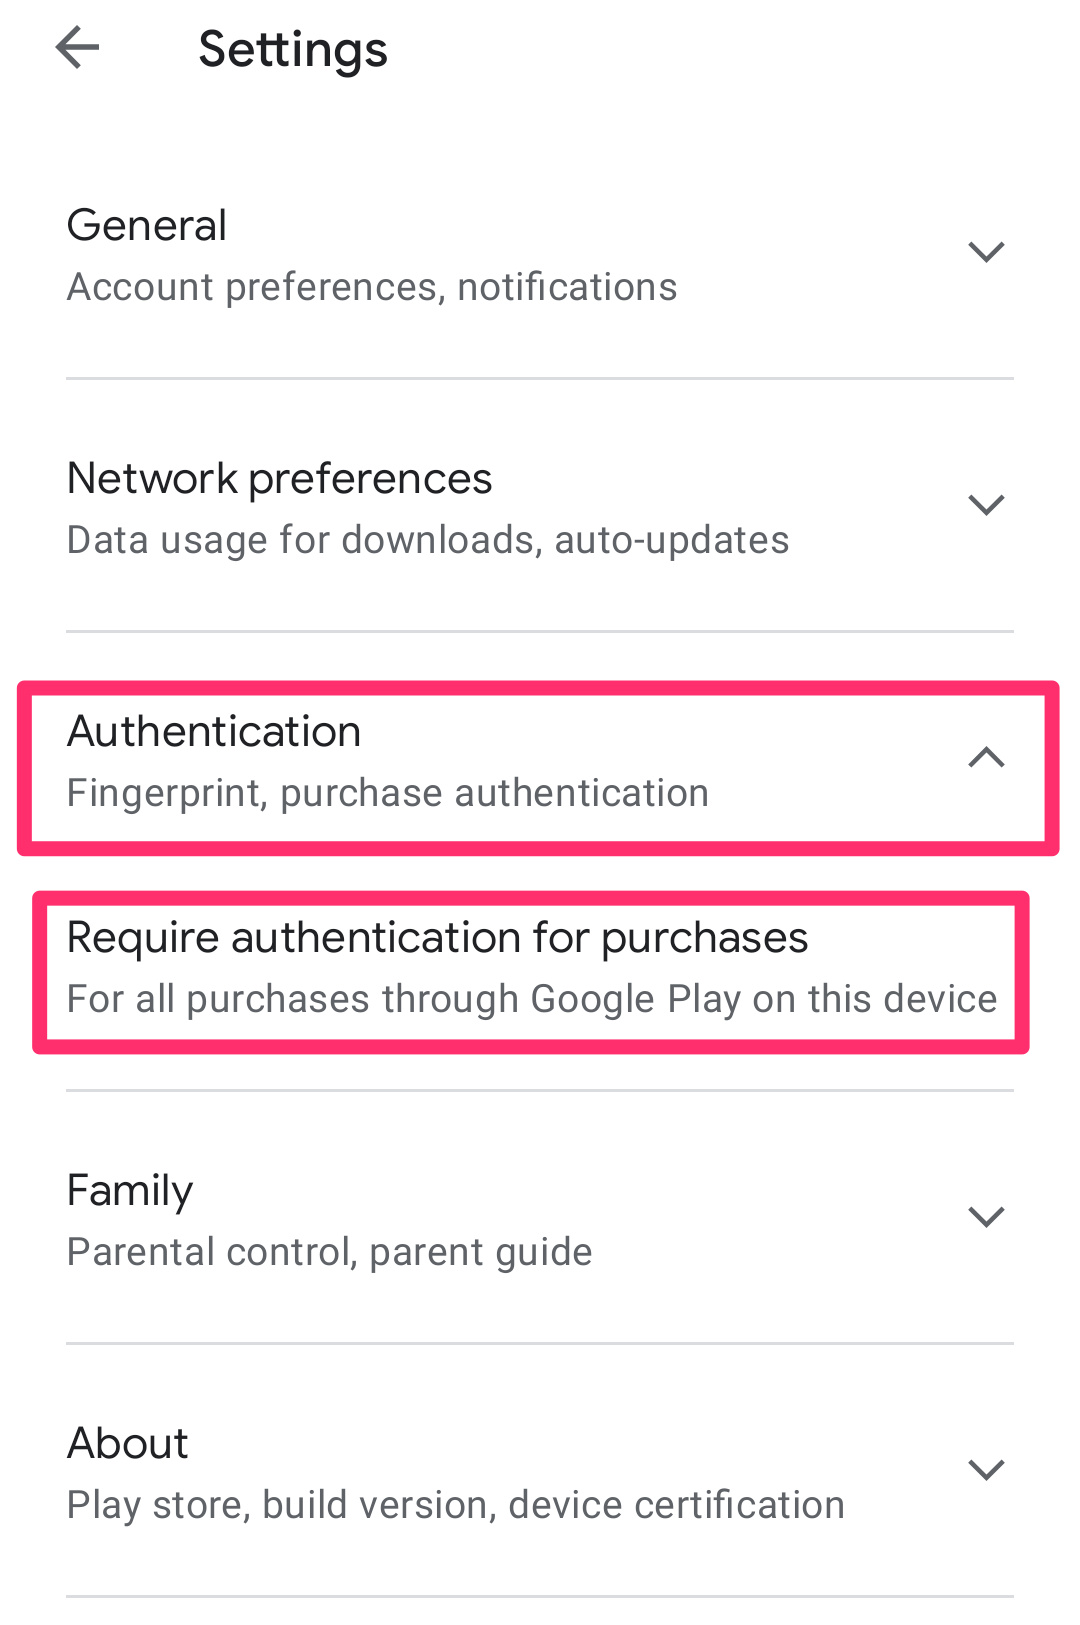 how to turn off in app purchases on android or iphone